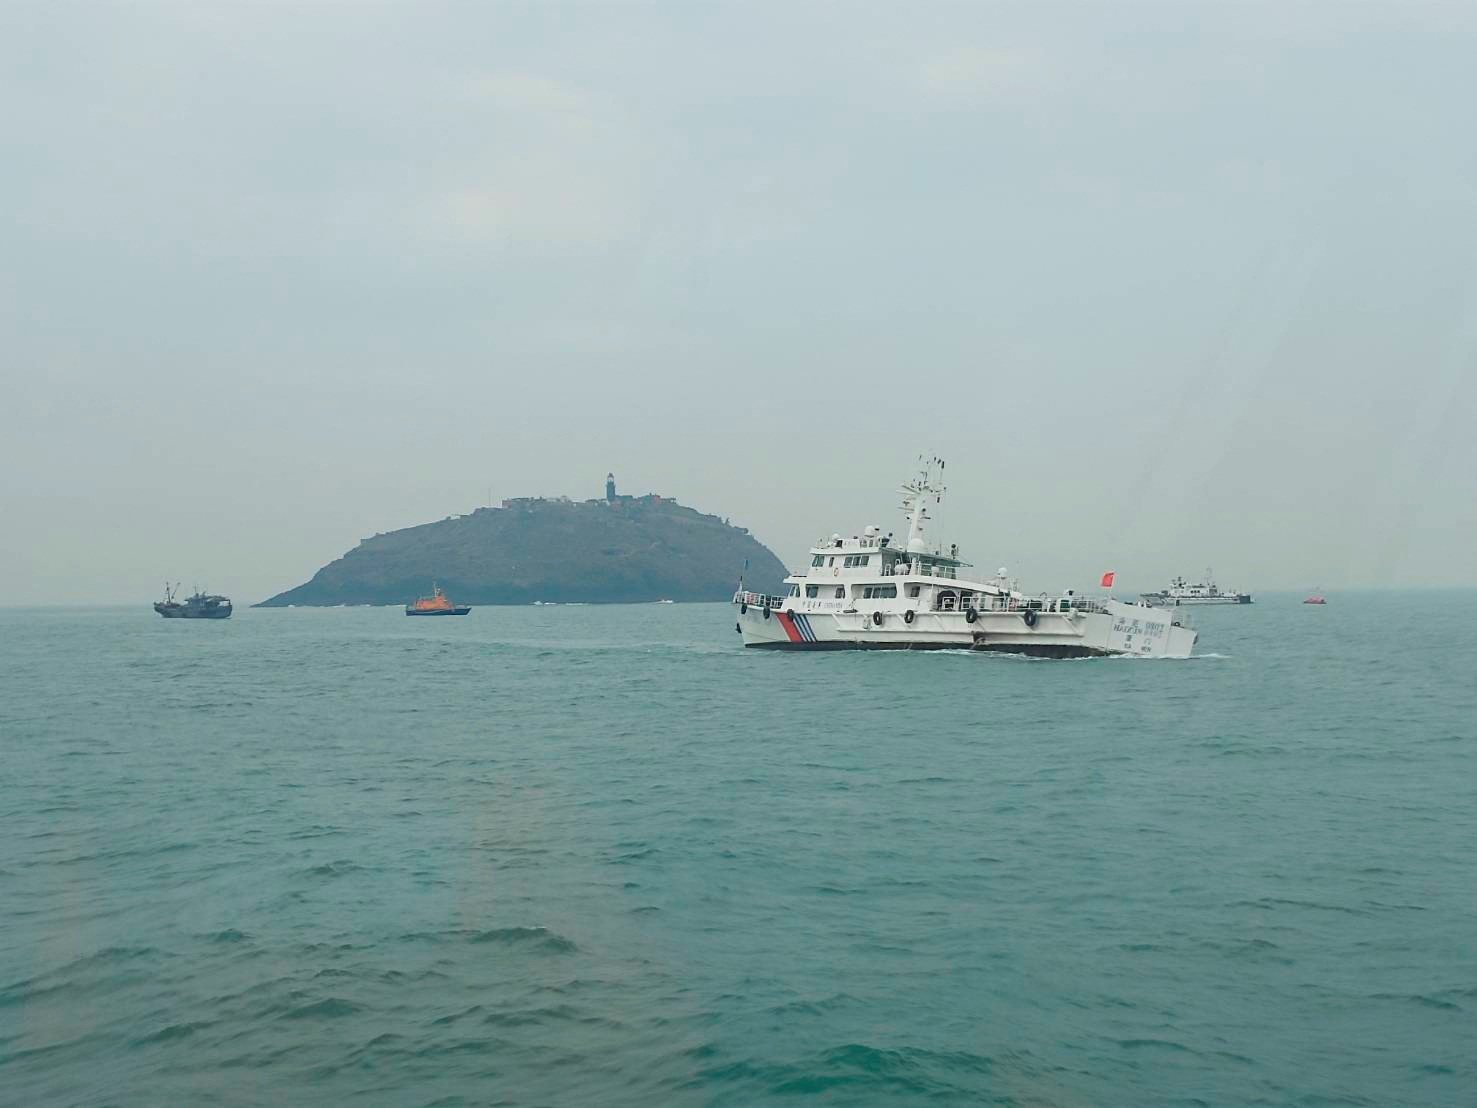 Beijing’s increased patrols near Quemoy were part of its “systematic use of grey zone [non-military] tactics to undermine the sovereignty” of the island, according to a Taipei -based think tank. Photo: Reuters 